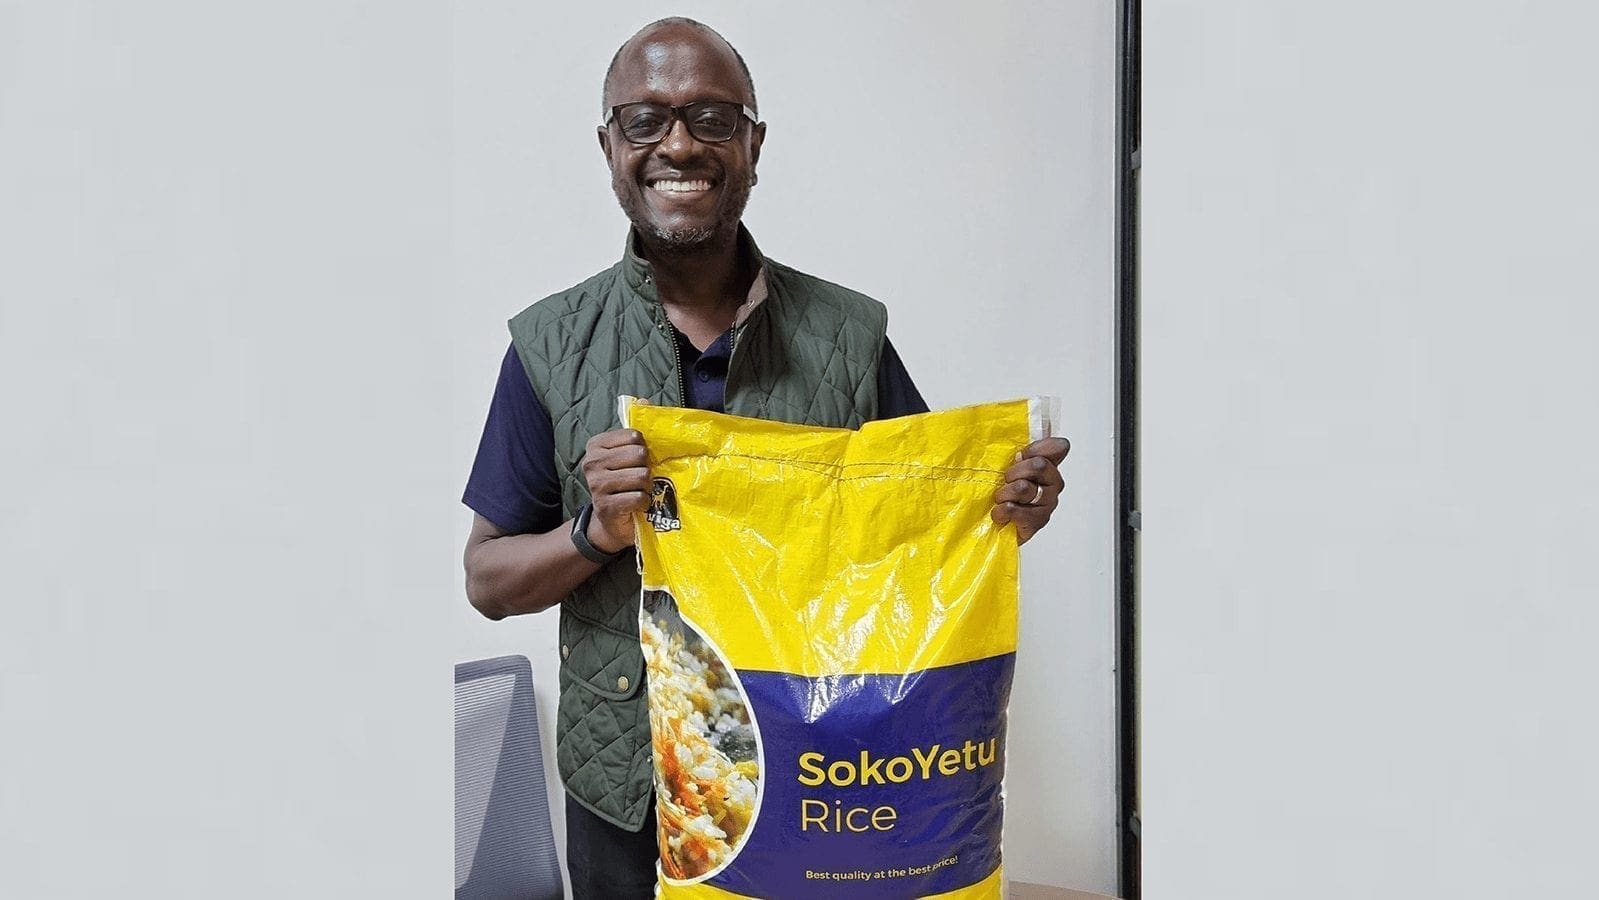 Twiga Foods launches first private label product dubbed SokoYetu Rice